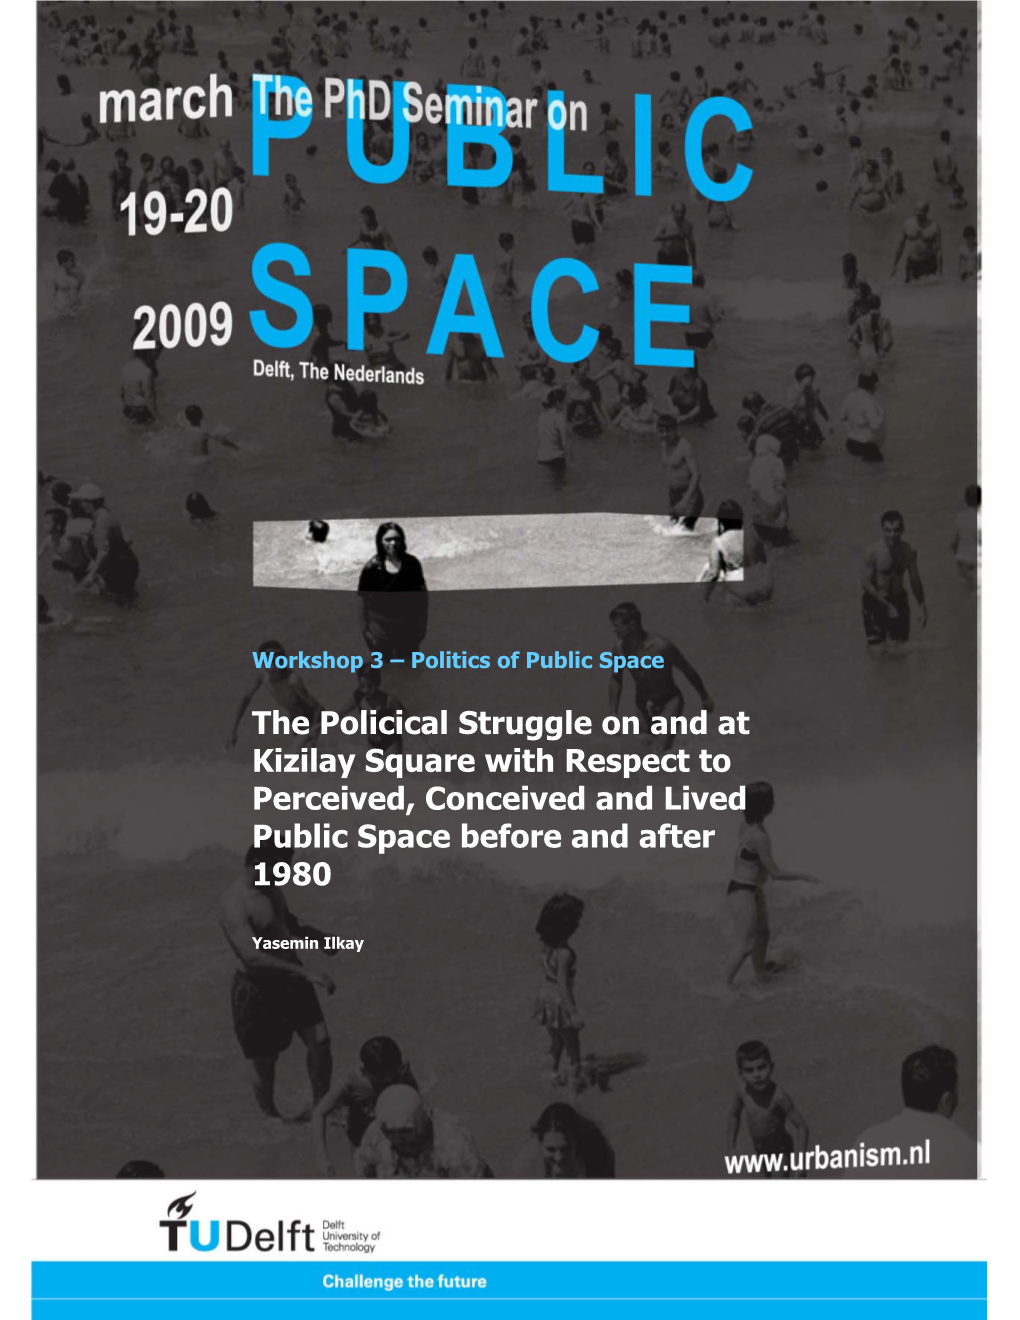 The Policical Struggle on and at Kizilay Square with Respect to Perceived, Conceived and Lived Public Space Before and After 1980